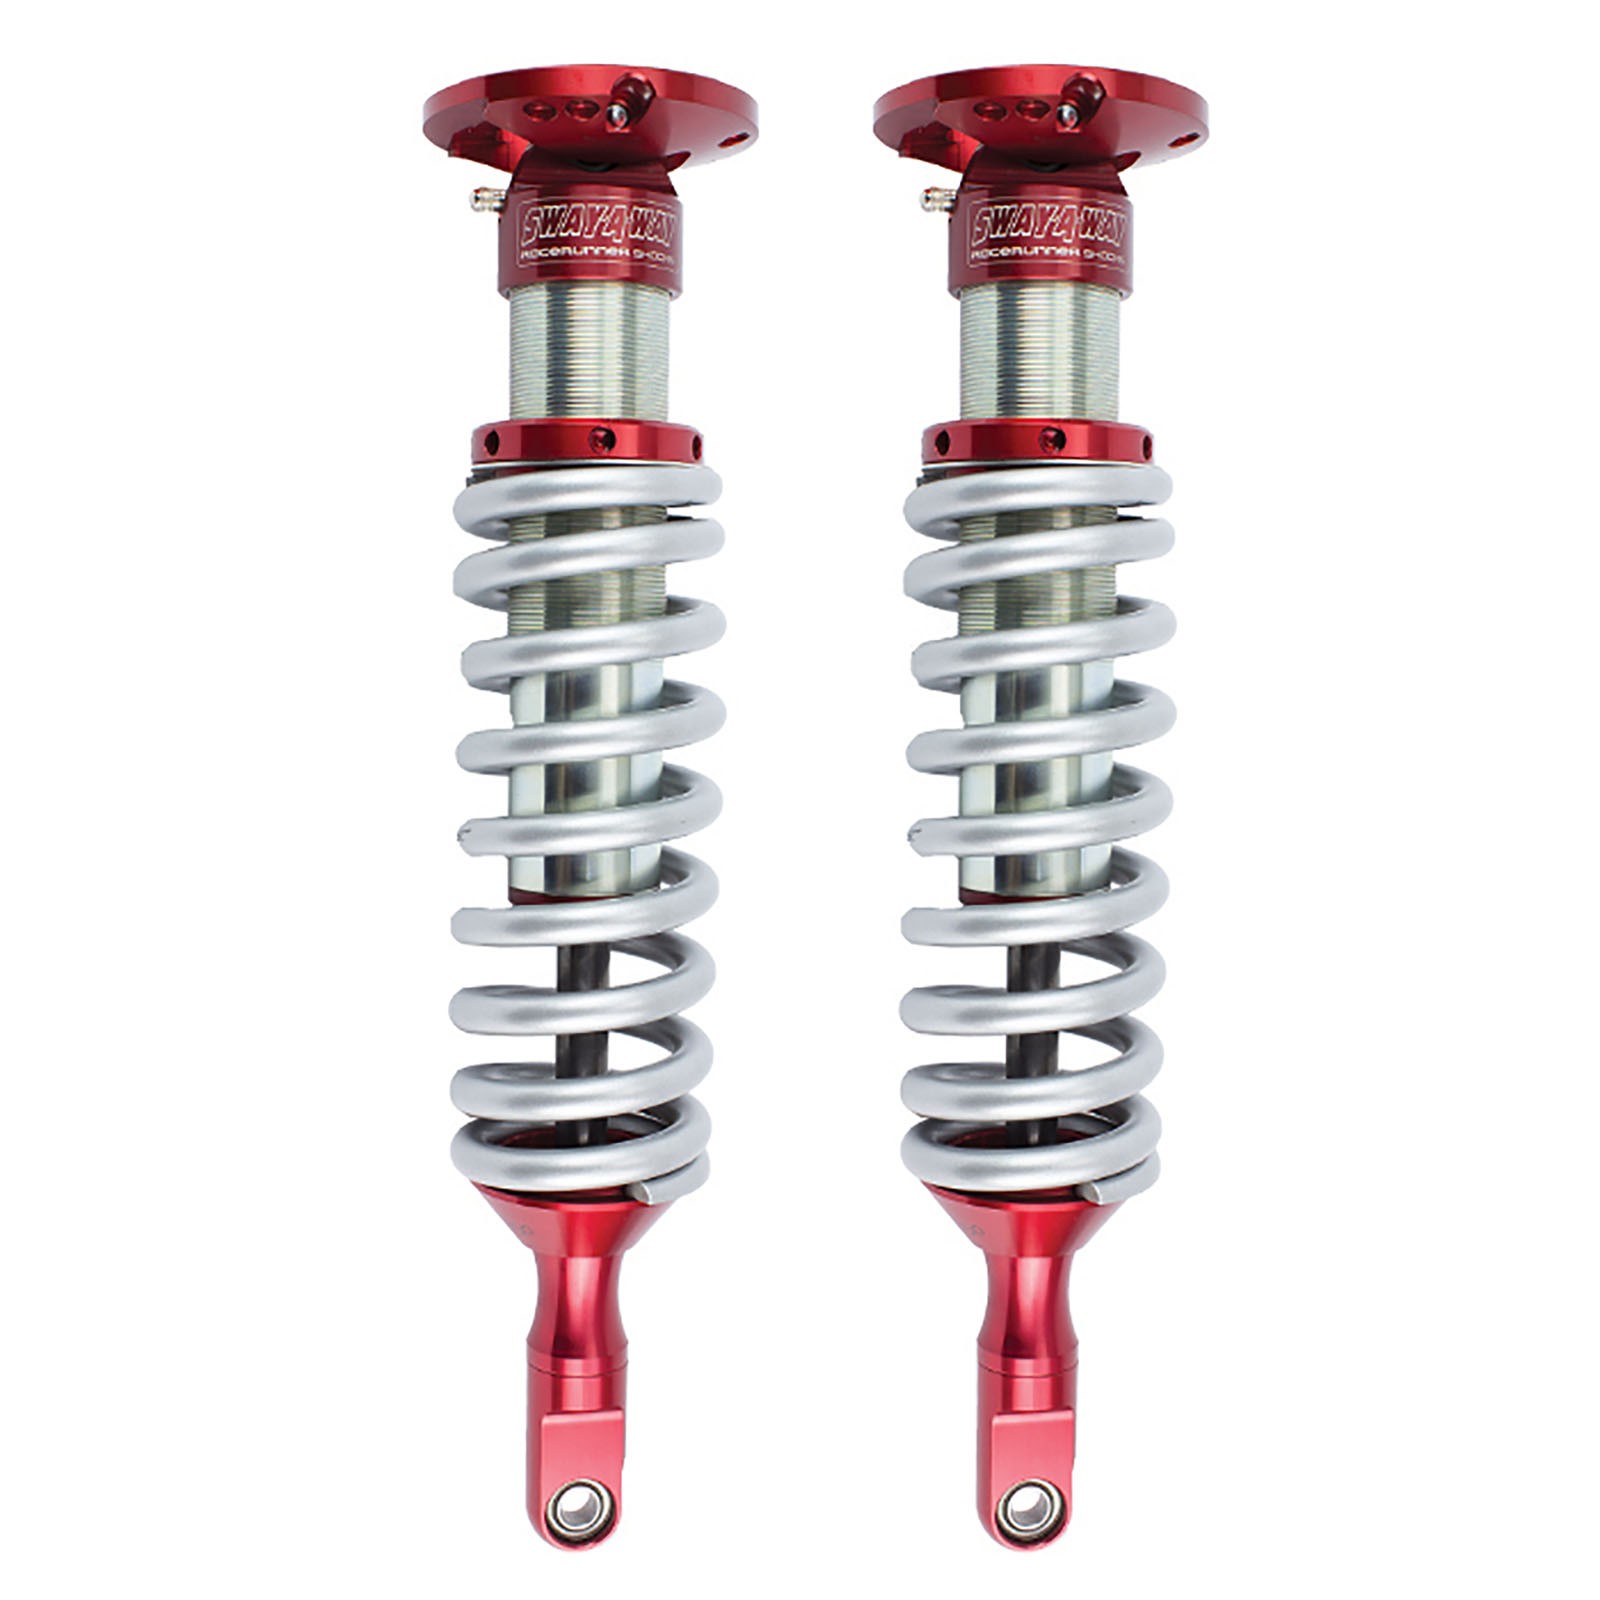 aFe Control Sway-A-Way 2.5" Front Coilover Kit - 10-14 FJ Cruiser